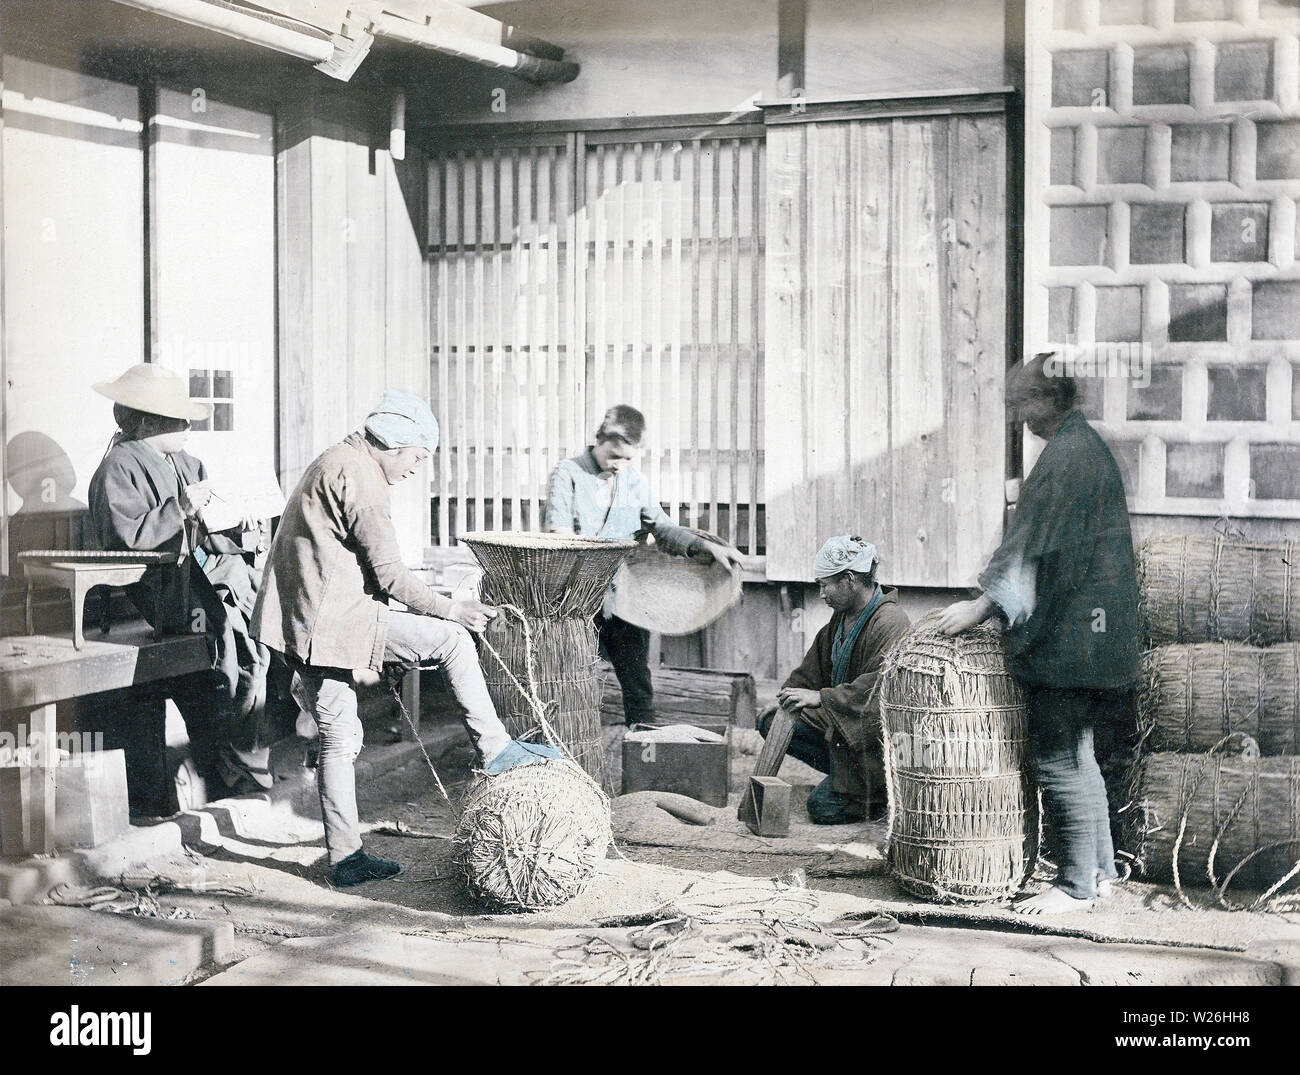 [ 1880s Japan - Packing Rice ] —   Two men in the foreground are packing rice in straw bags, while the man on the left is taking records. A soroban (Japanese abacus) lies on the table next to him. In the back a boy is filling a still open bag with rice. A masu wooden measuring box lies on the ground. Masu existed in many sizes from 0.9 to 18 liters.  19th century vintage albumen photograph. Stock Photo